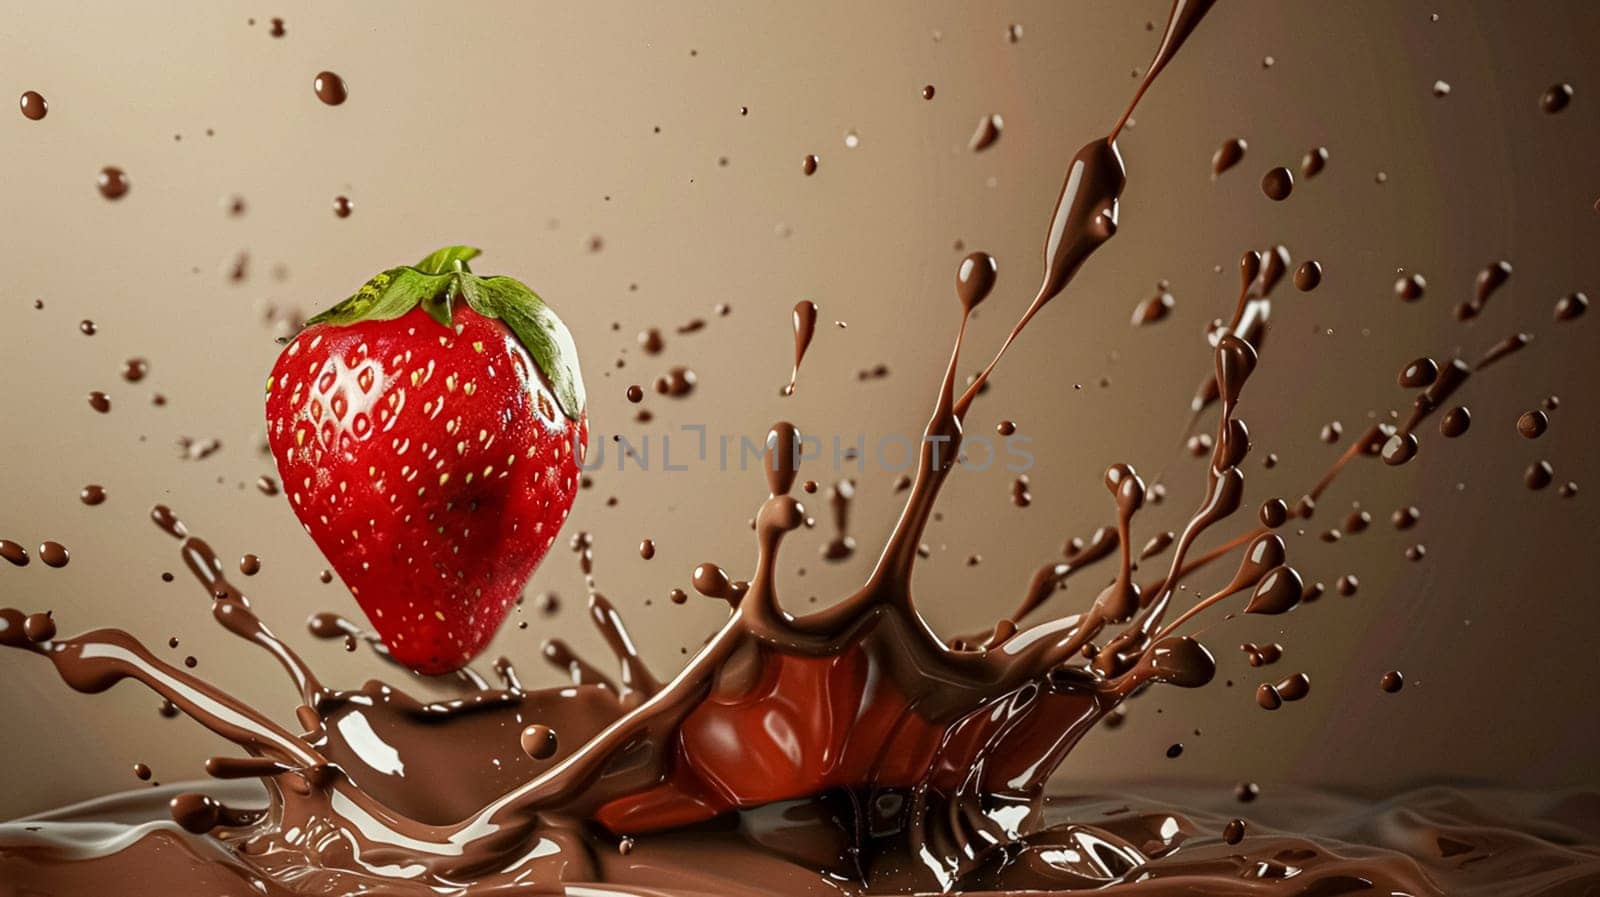 Strawberry falling into melted liquid chocolate, food dessert and confectionery industry